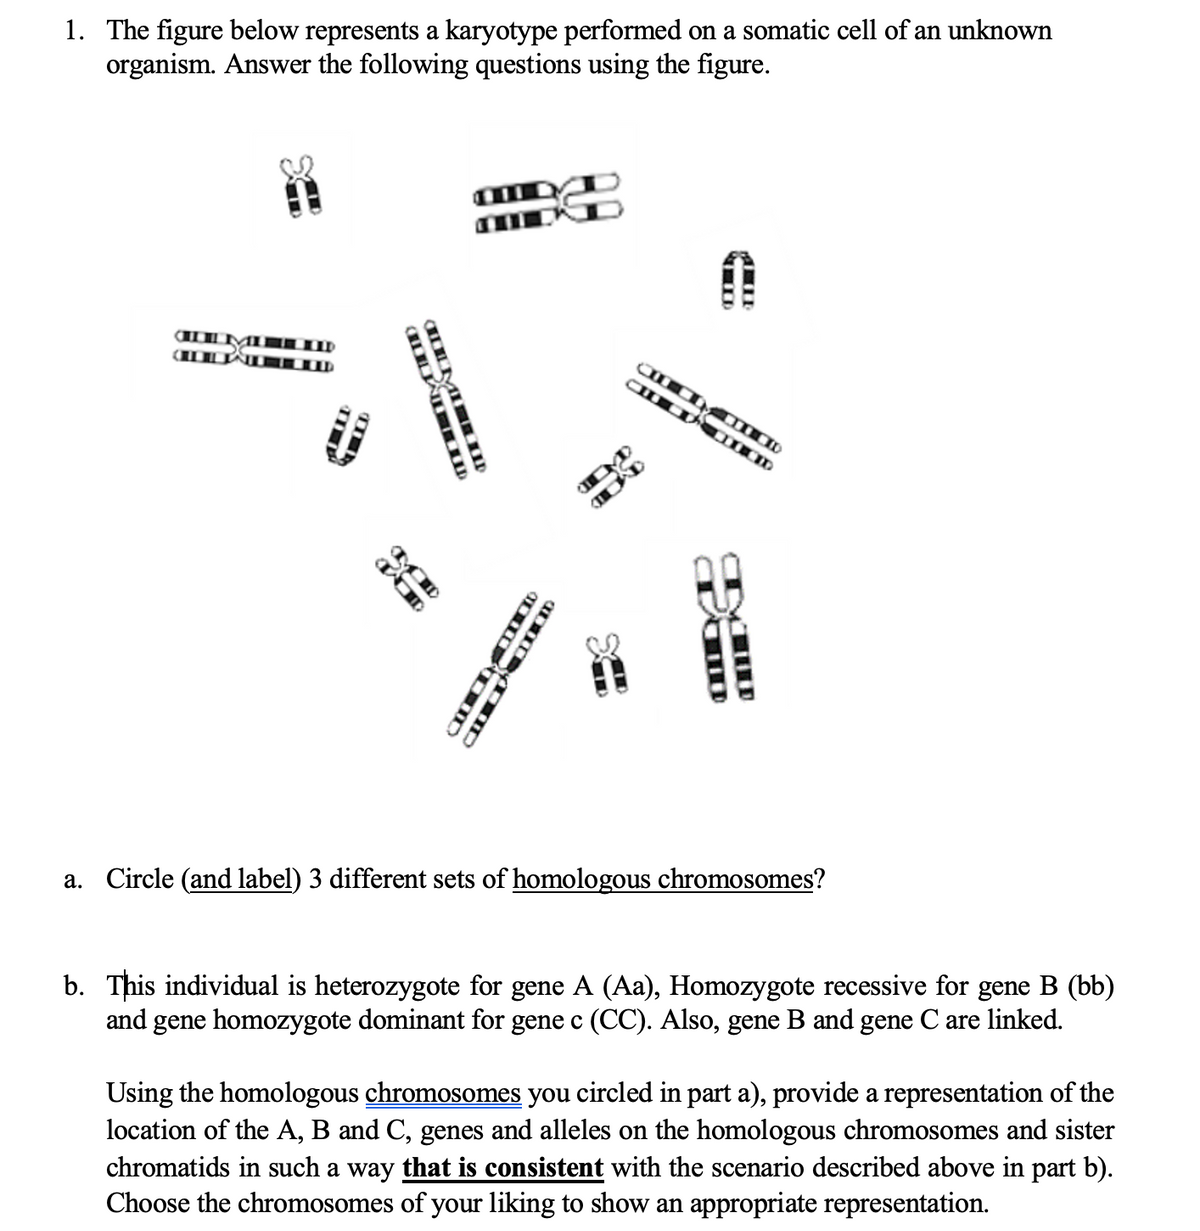 1. The figure below represents a karyotype performed on a somatic cell of an unknown
organism. Answer the following questions using the figure.
a. Circle (and label) 3 different sets of homologous chromosomes?
b. This individual is heterozygote for gene A (Aa), Homozygote recessive for gene B (bb)
and gene homozygote dominant for gene c (CC). Also, gene B and gene C are linked.
Using the homologous chromosomes you circled in part a), provide a representation of the
location of the A, B and C, genes and alleles on the homologous chromosomes and sister
chromatids in such a way that is consistent with the scenario described above in part b).
Choose the chromosomes of your liking to show an appropriate representation.
TMIID
IL MI
